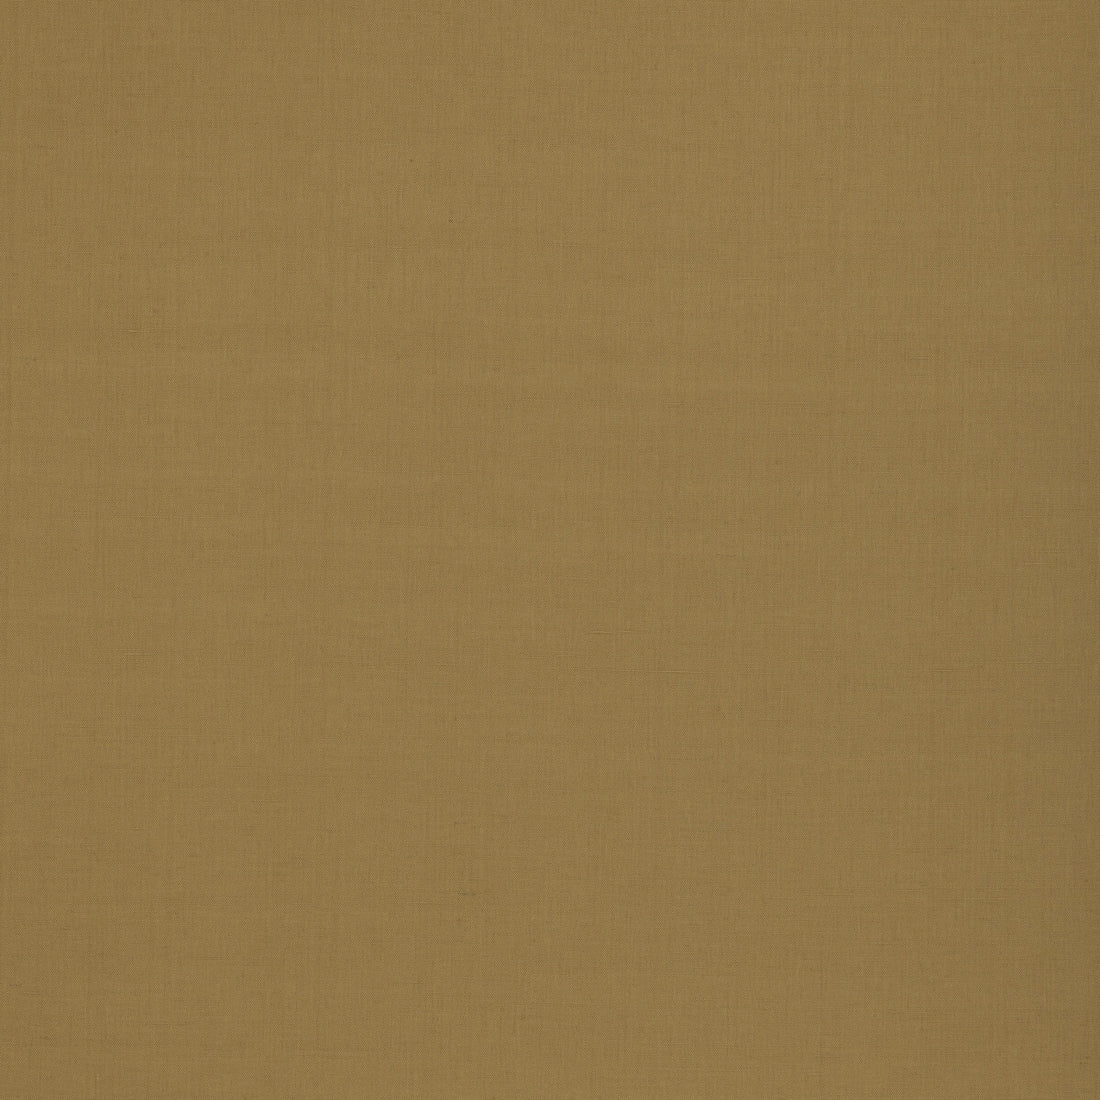 Kemble fabric in ochre color - pattern BF11046.840.0 - by G P &amp; J Baker in the Baker House Plain &amp; Stripe II collection